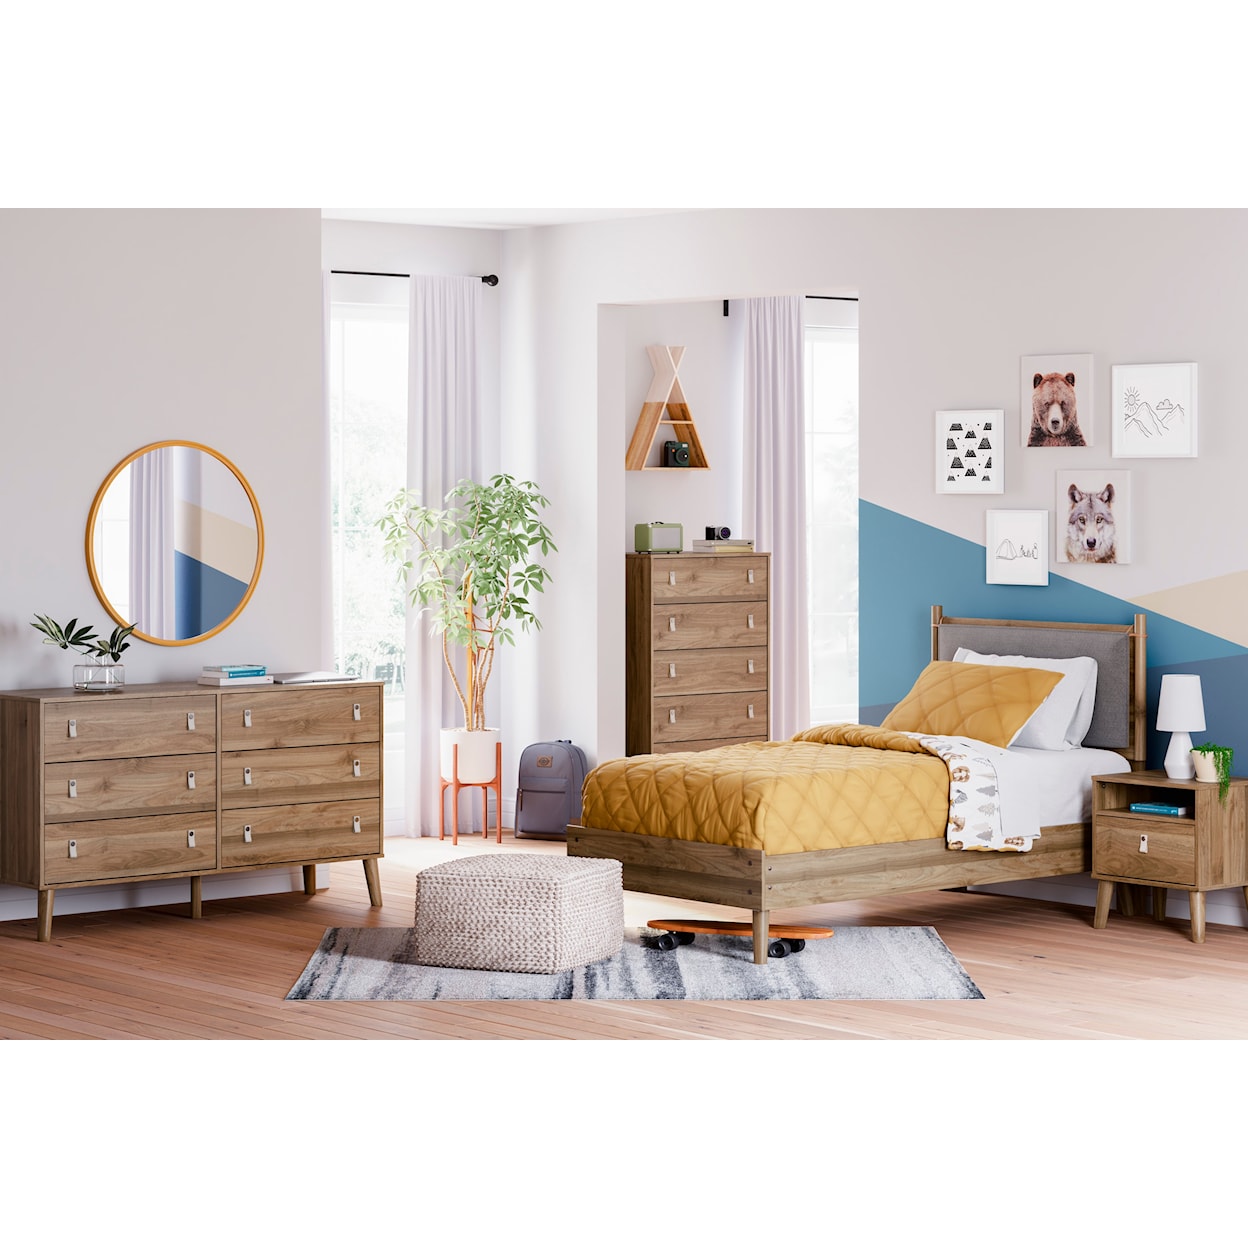 Signature Design by Ashley Aprilyn Twin Bedroom Set